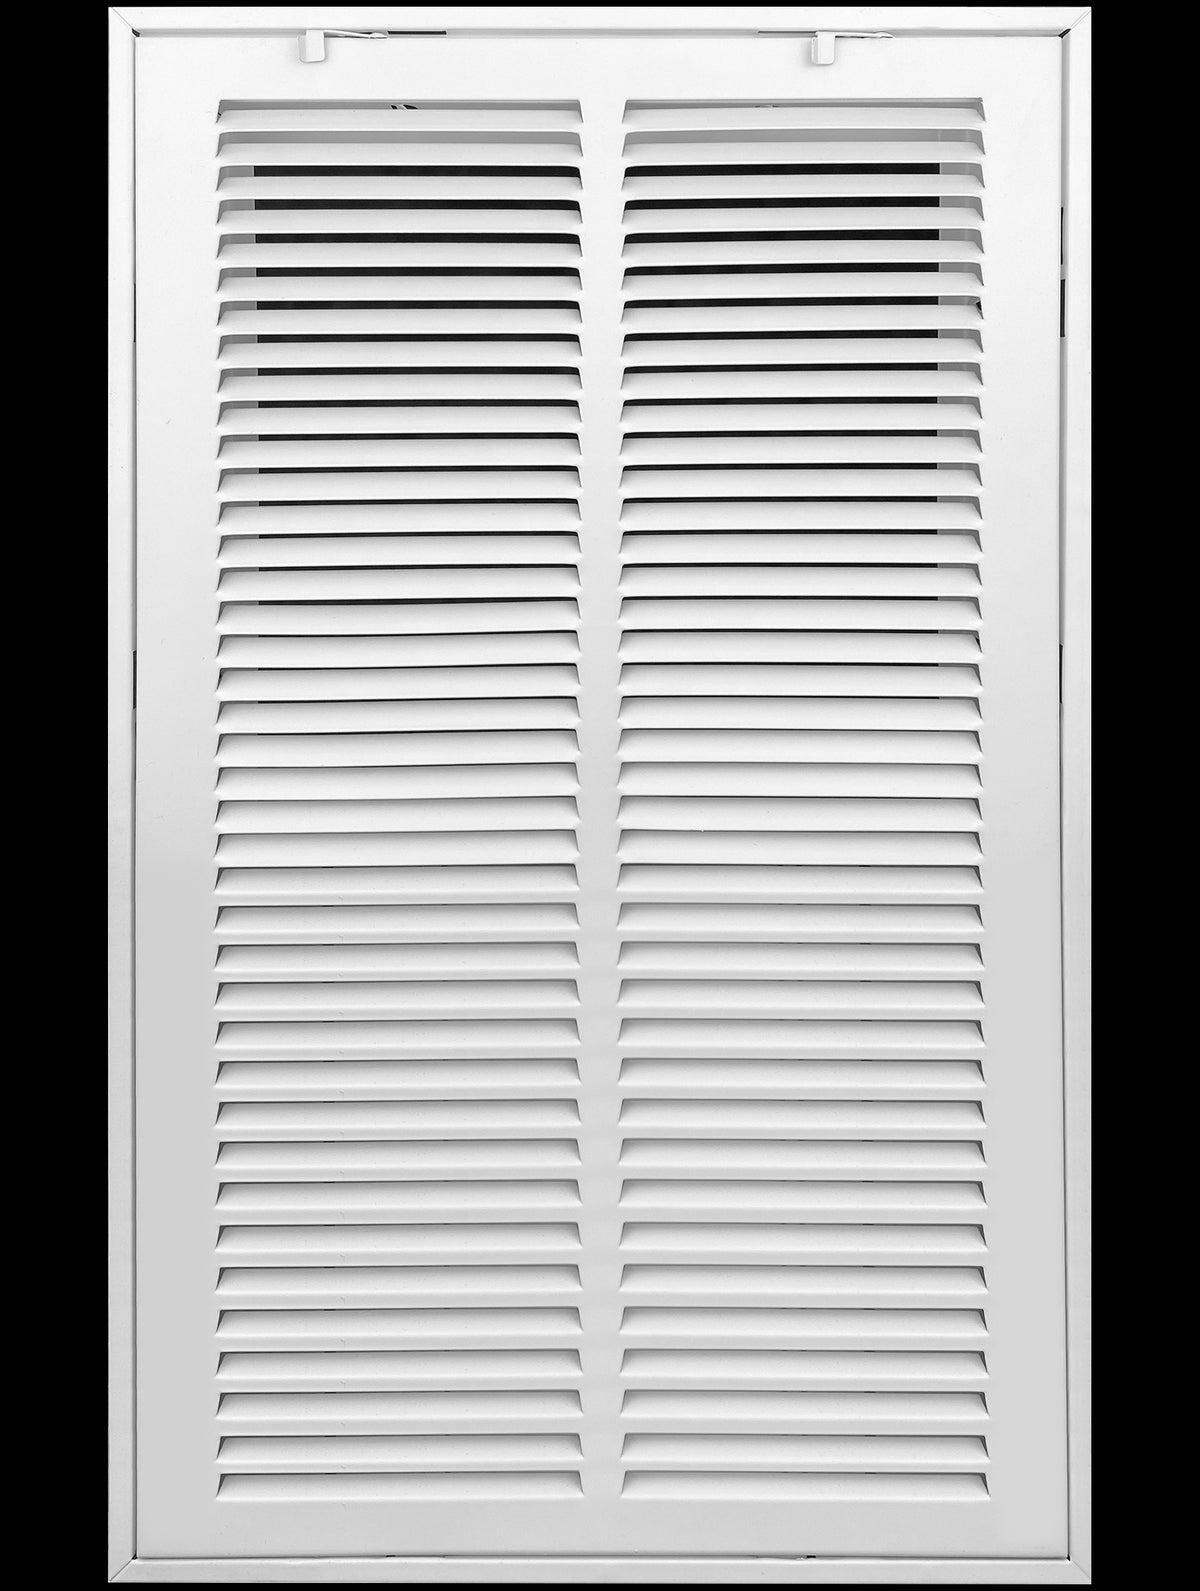 airgrilles 14" x 20" duct opening  -  steel return air filter grille for sidewall and ceiling hnd-rafg1-wh-14x20 752505975245 - 1